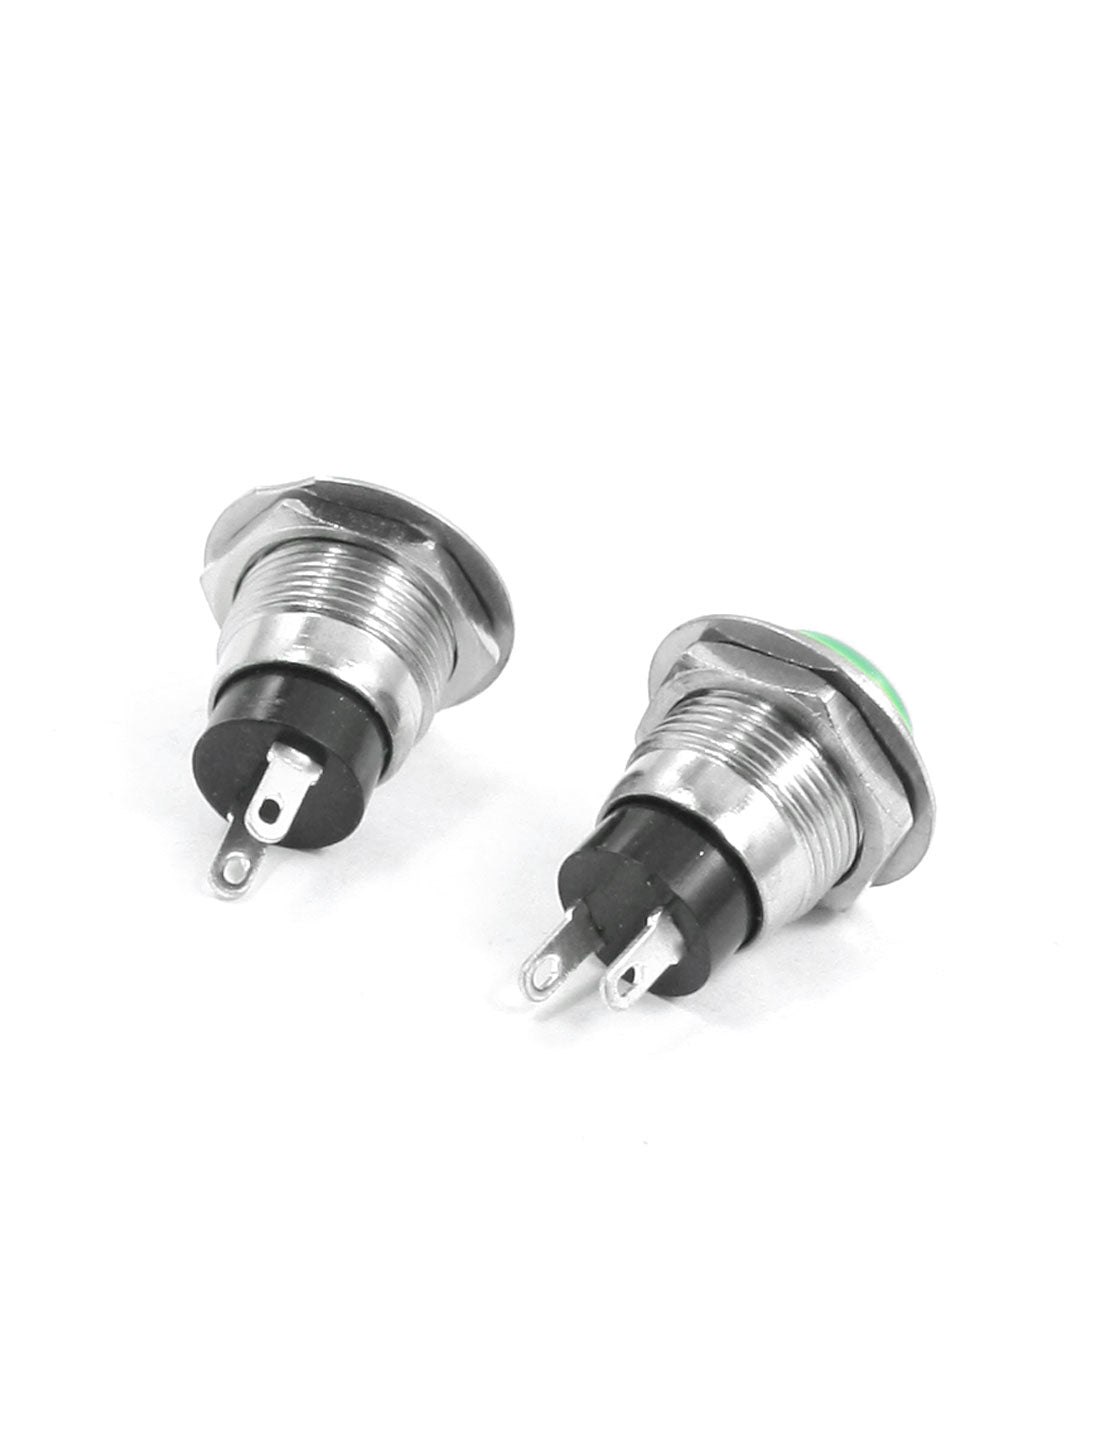 uxcell Uxcell 2pcs 2 Terminal 12mm Momentary SPST Red Green Push Button Switch AC125V 6A 250V 3A